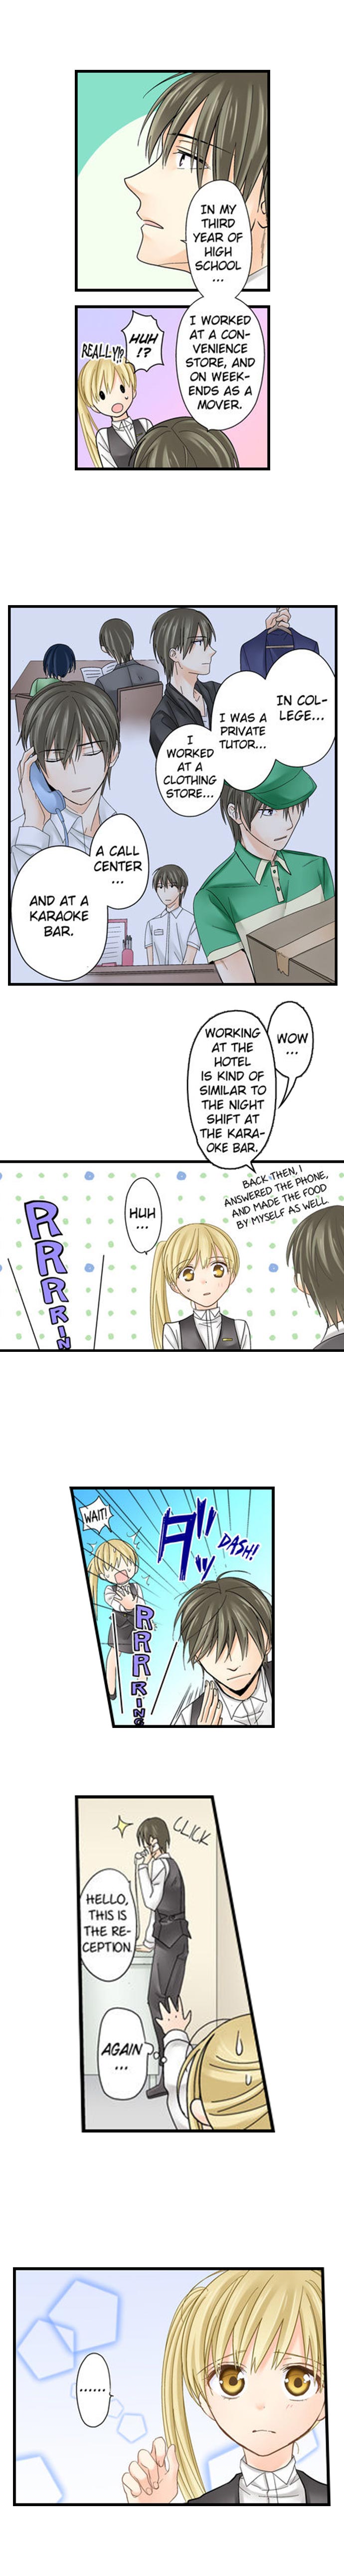 Running a Love Hotel with My Math Teacher - Chapter 11 Page 7